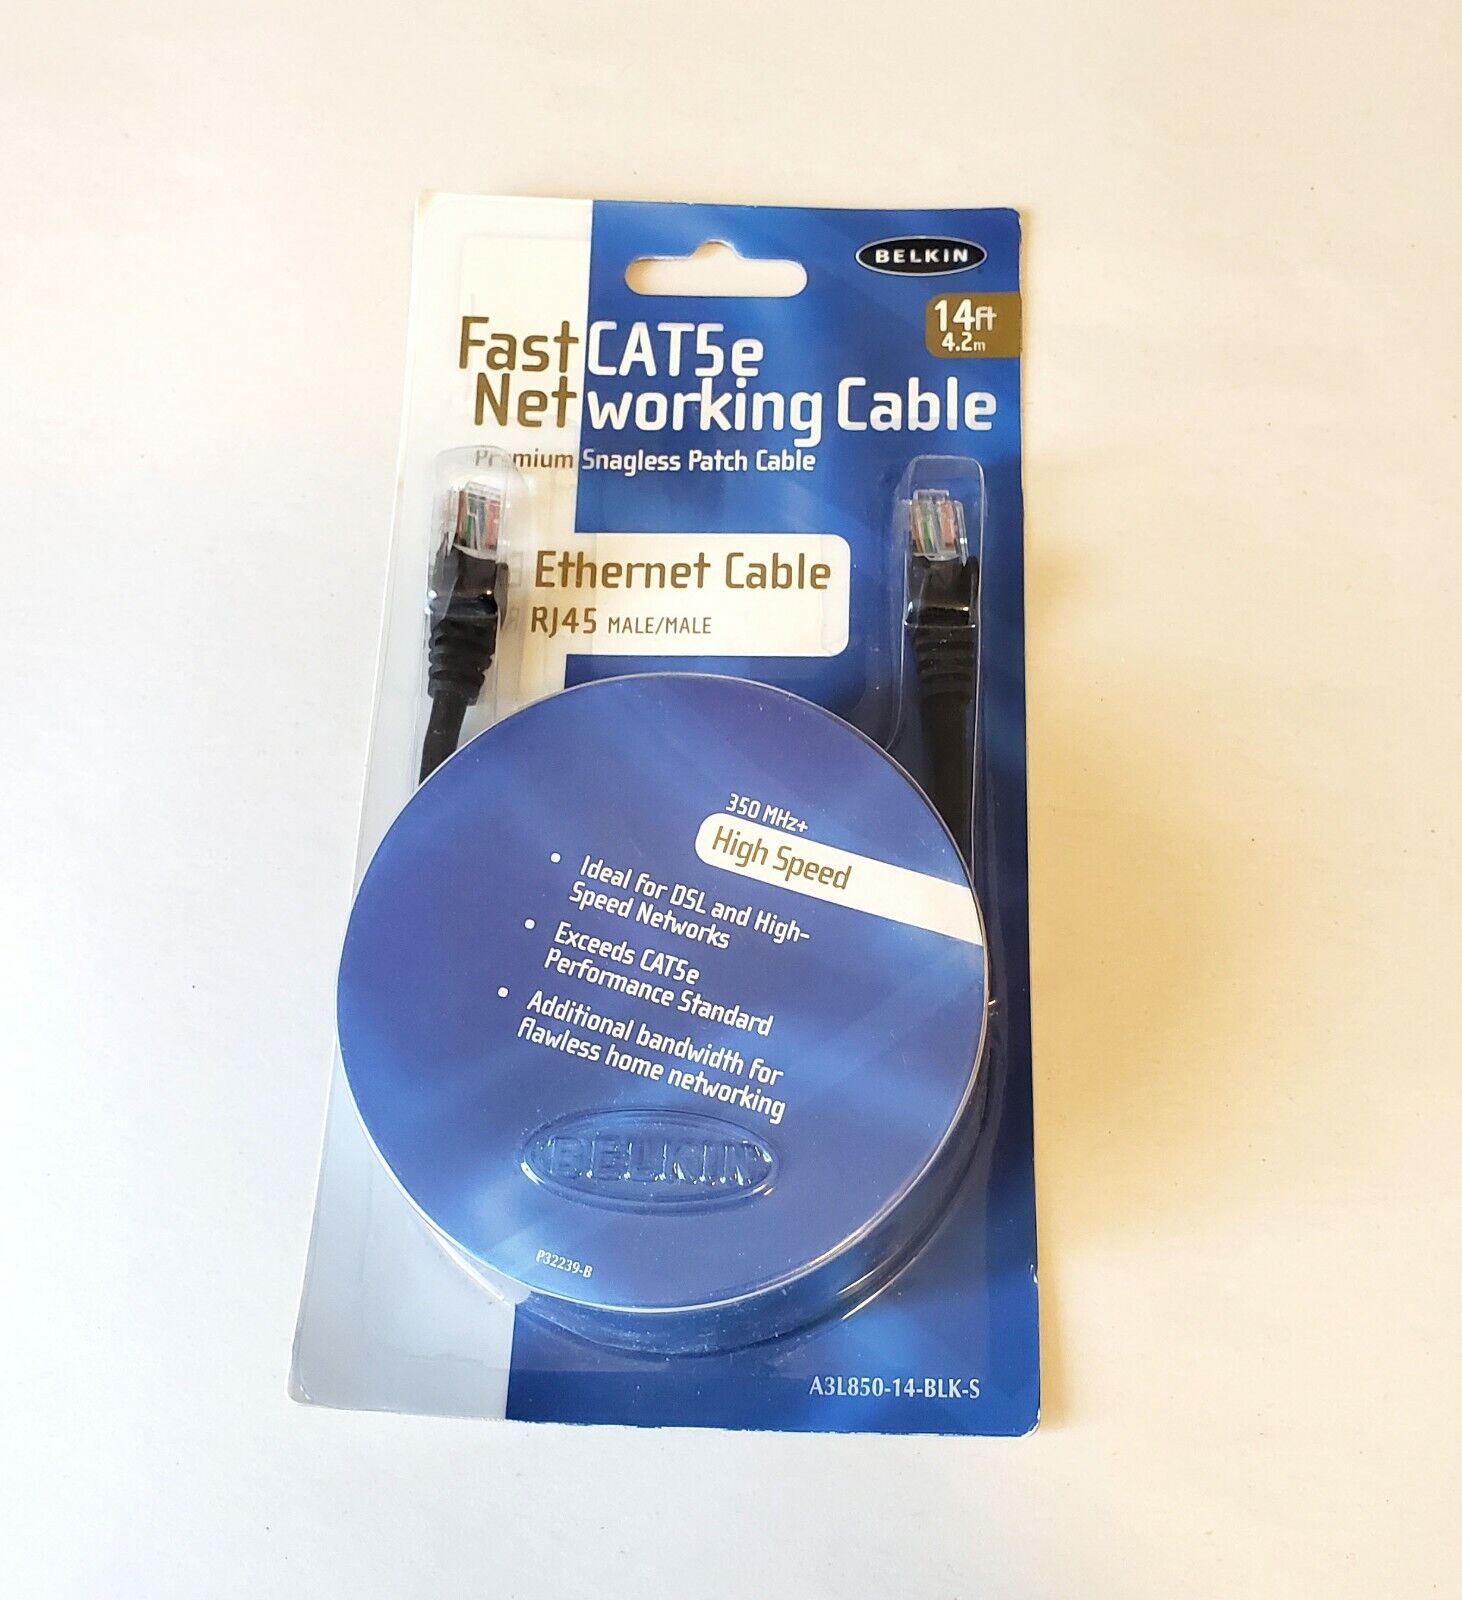 Belkin Fast CAT5e Premium Snagless Ethernet Cable 350 MHz , R/45 Male/Male. 14 f